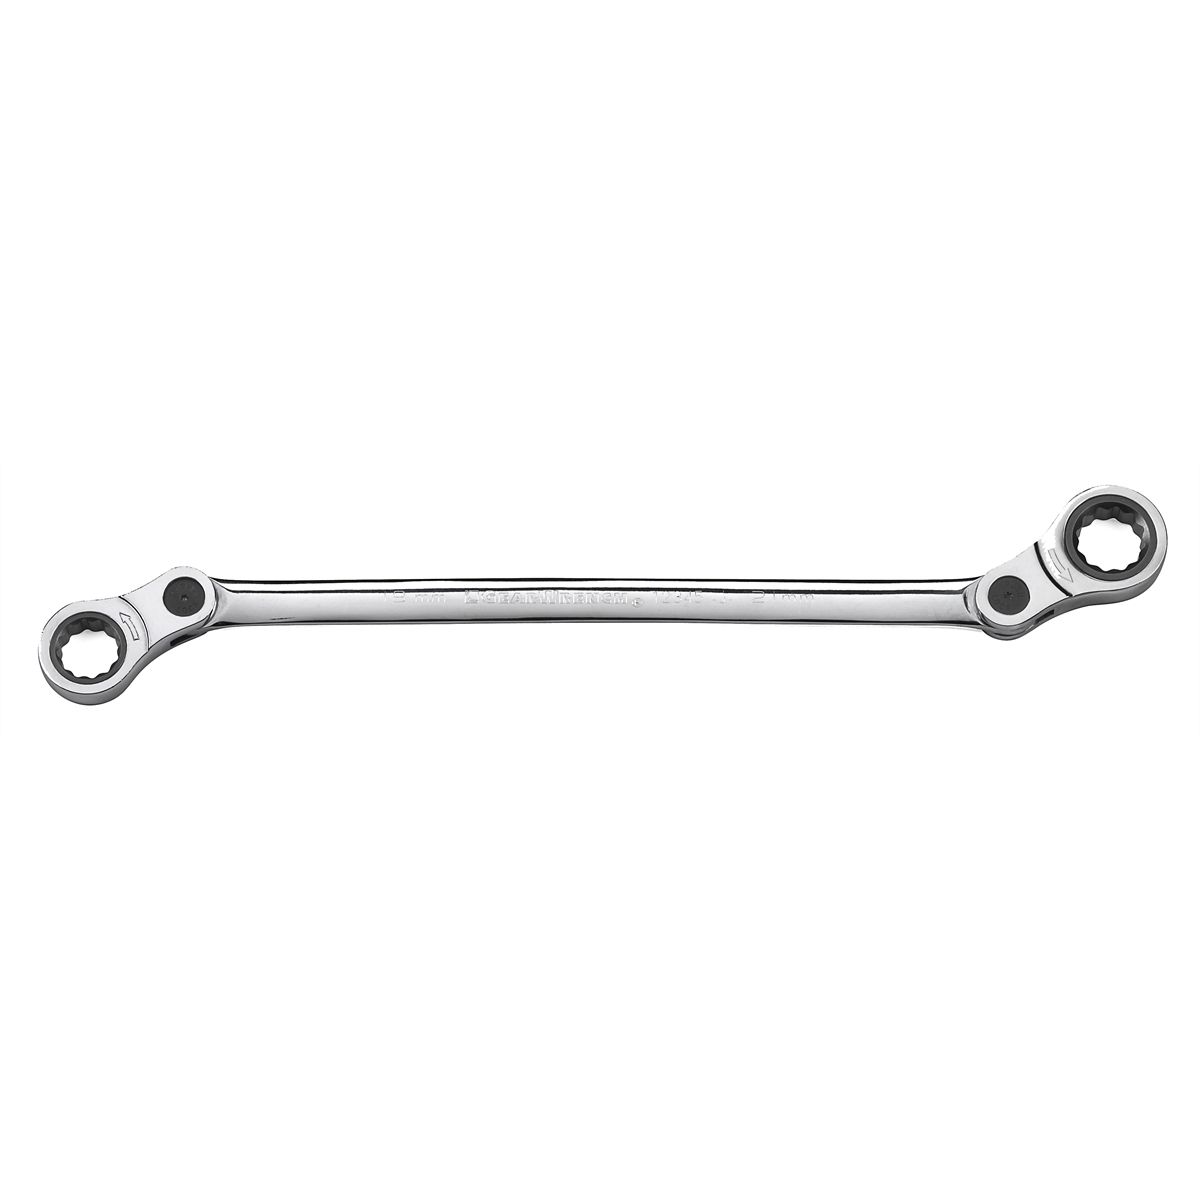 19MMX21MM XXL INDEXING DBLE BOX RATCHETING WRENCH